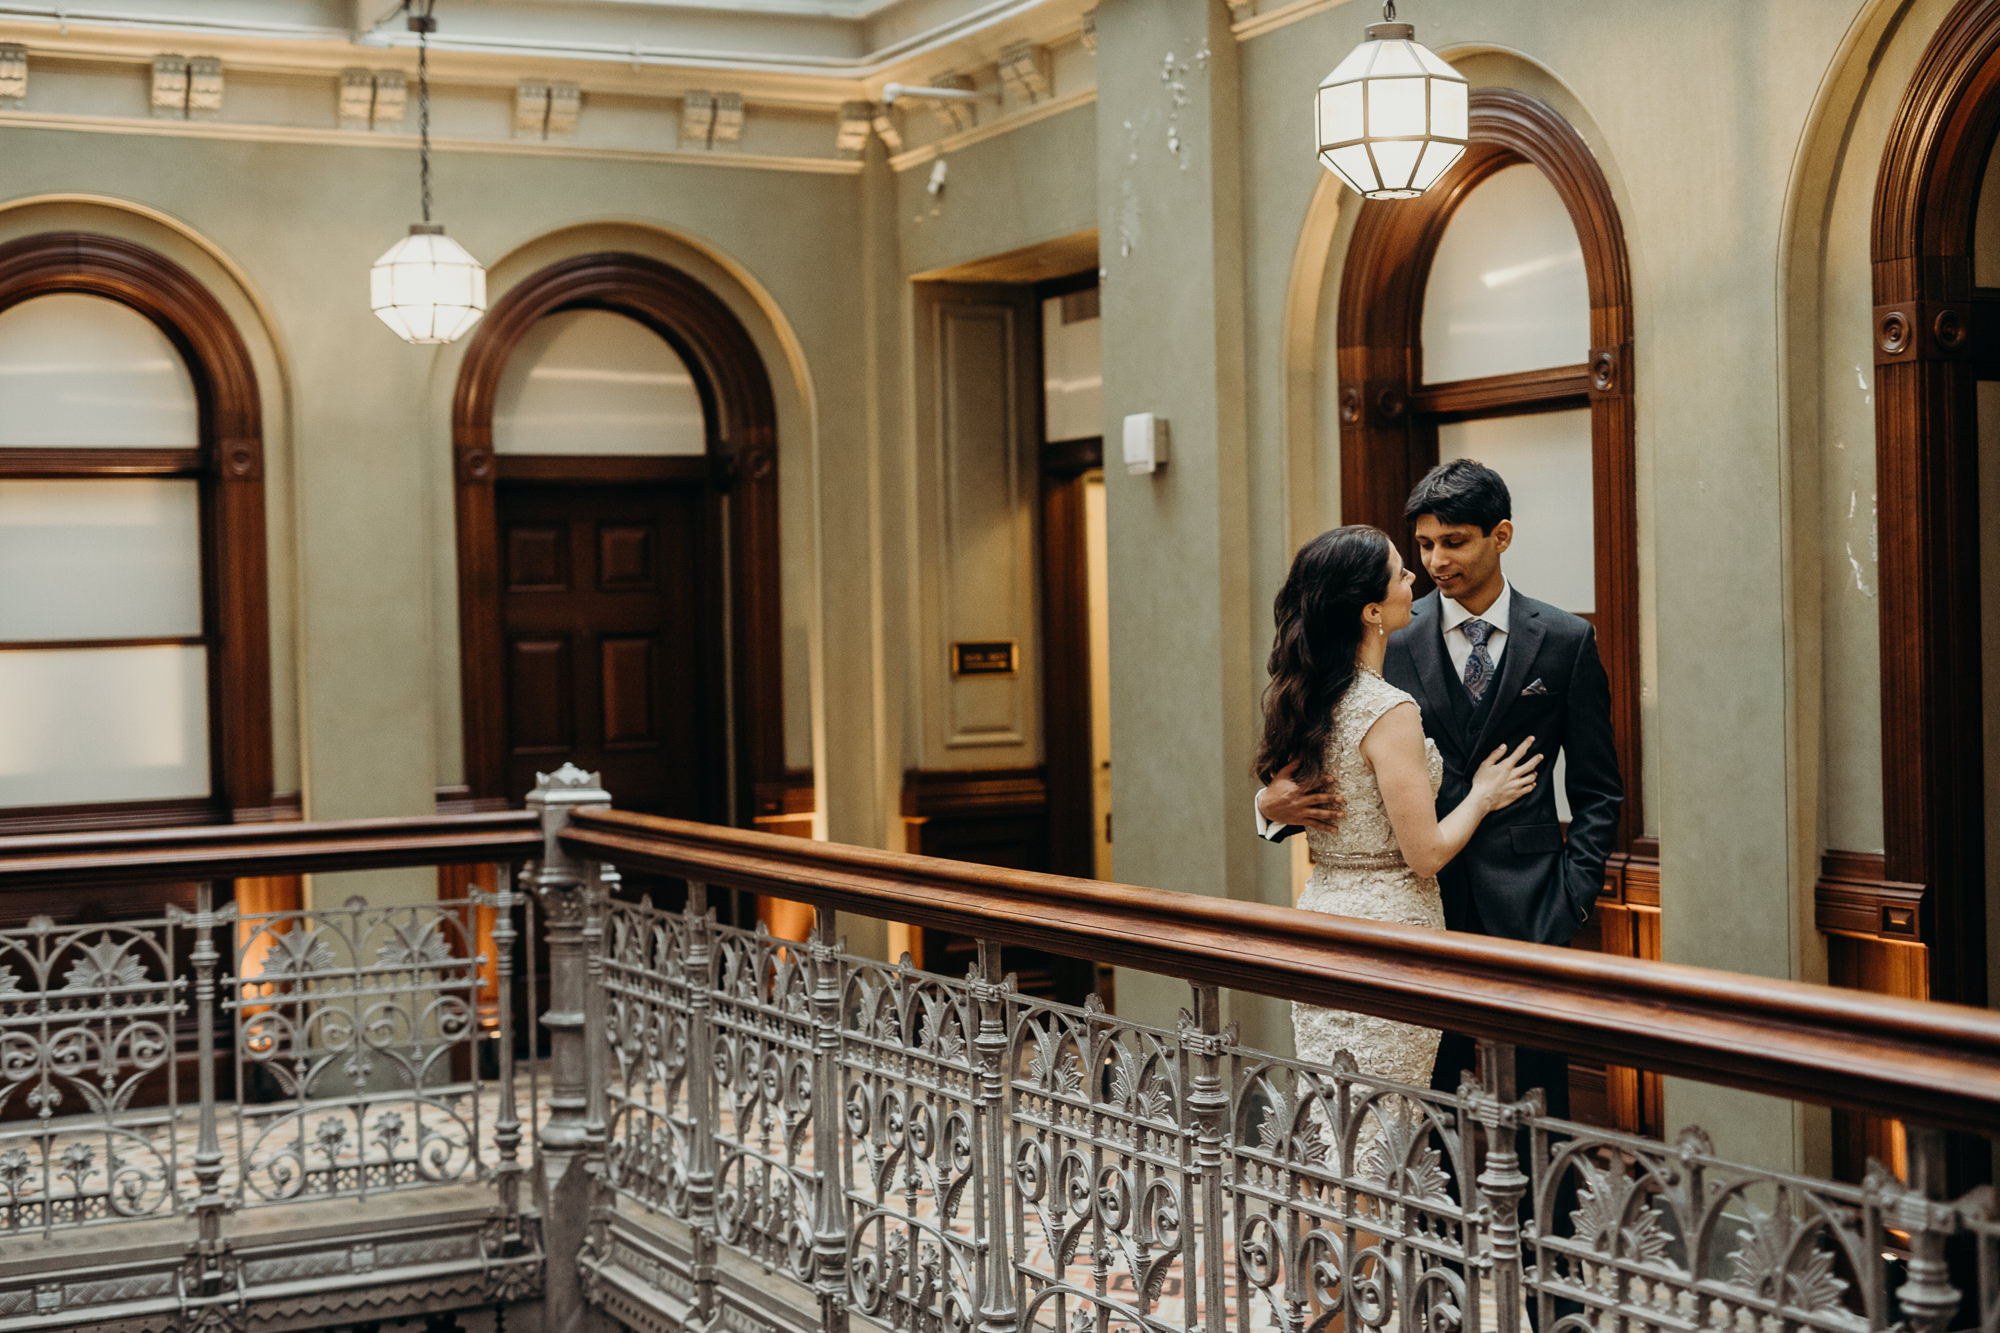 bride and groom portrait at the beekman hotel in new york city, ny